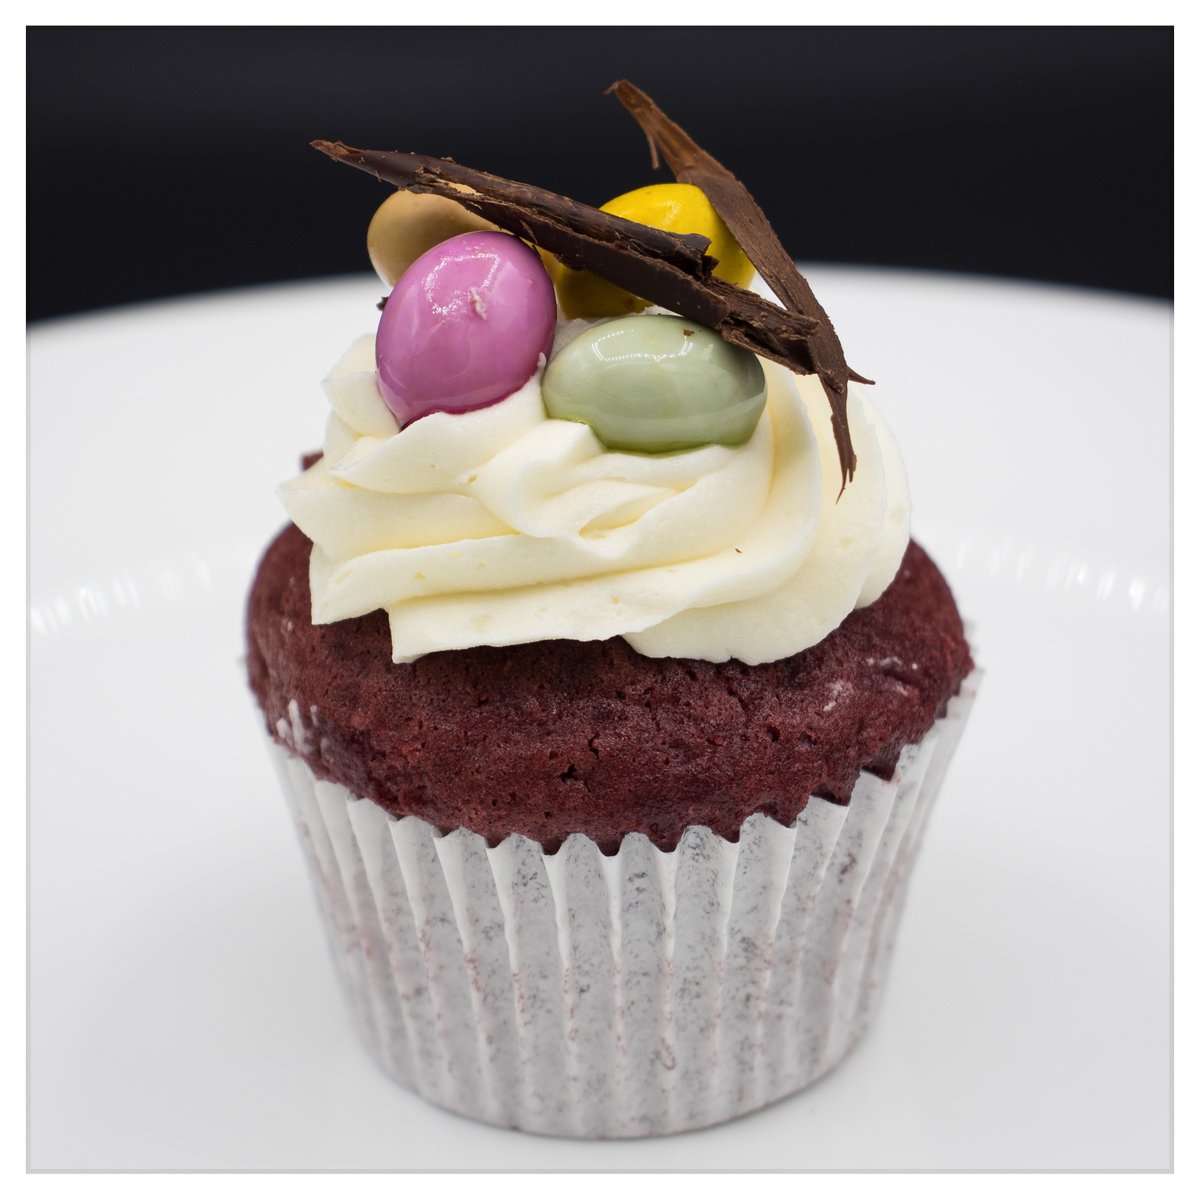 Make sure you do not miss out on these amazing Easter, red velvet cup cakes with vanilla frosting, mini eggs and a chocolate shard!

Available at our 'Holland Park Café in Holland Park today . . . .

#BakedGoods
#Cafe
#ColdDrinks
#CooksandPartners
#Homemade
#LocallySourced